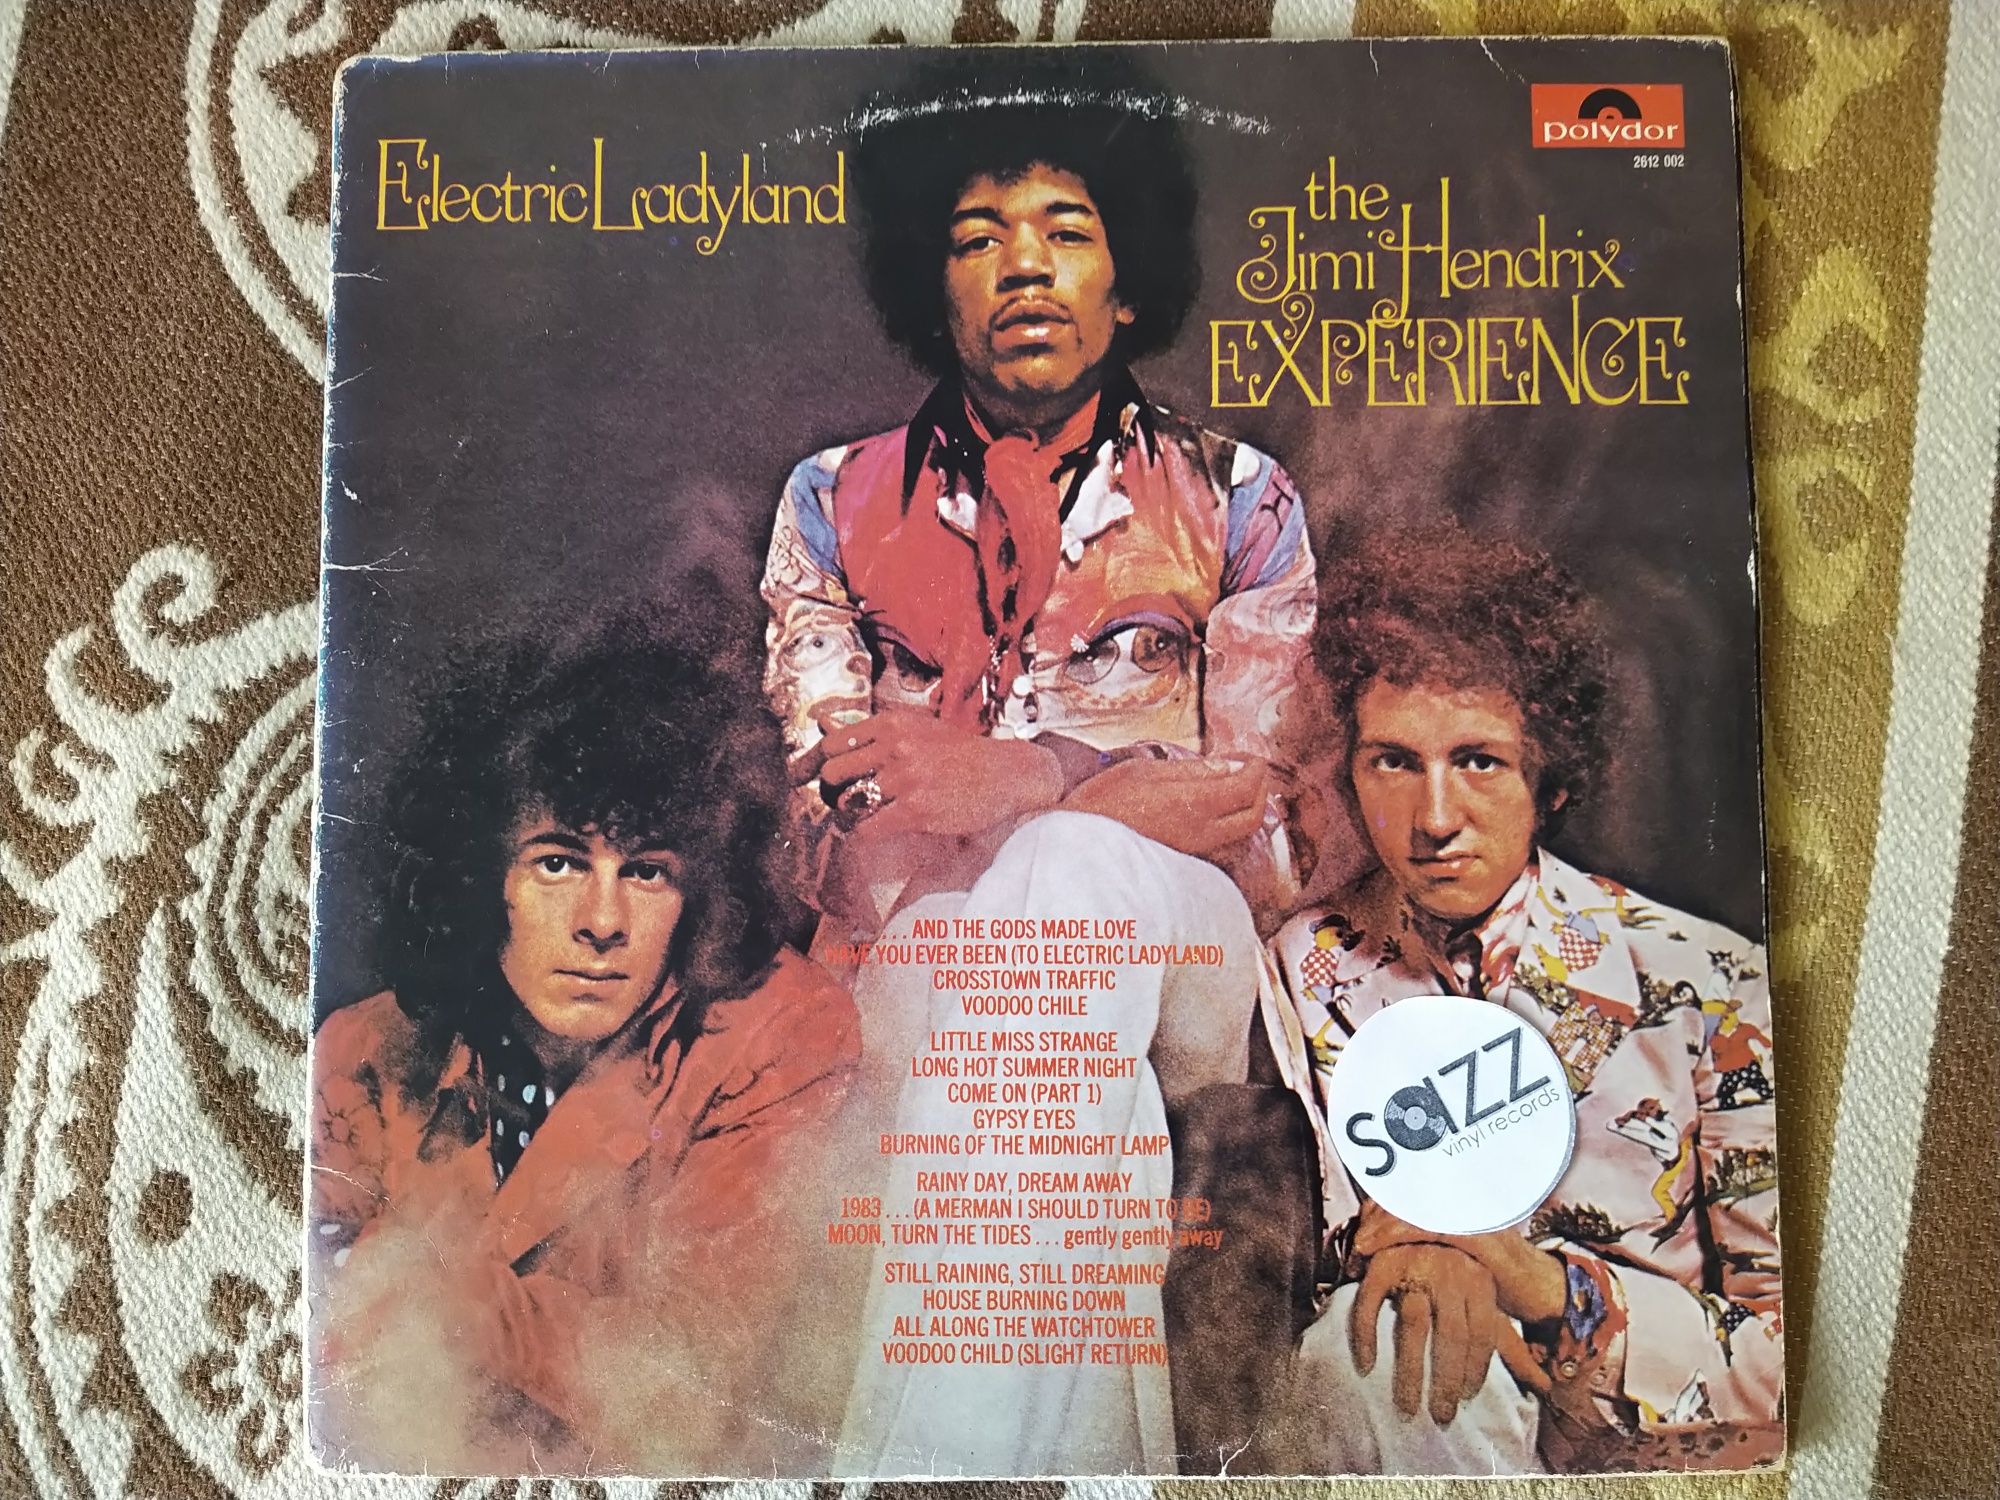 The Jimi Hendrix experience - Electric ladyland